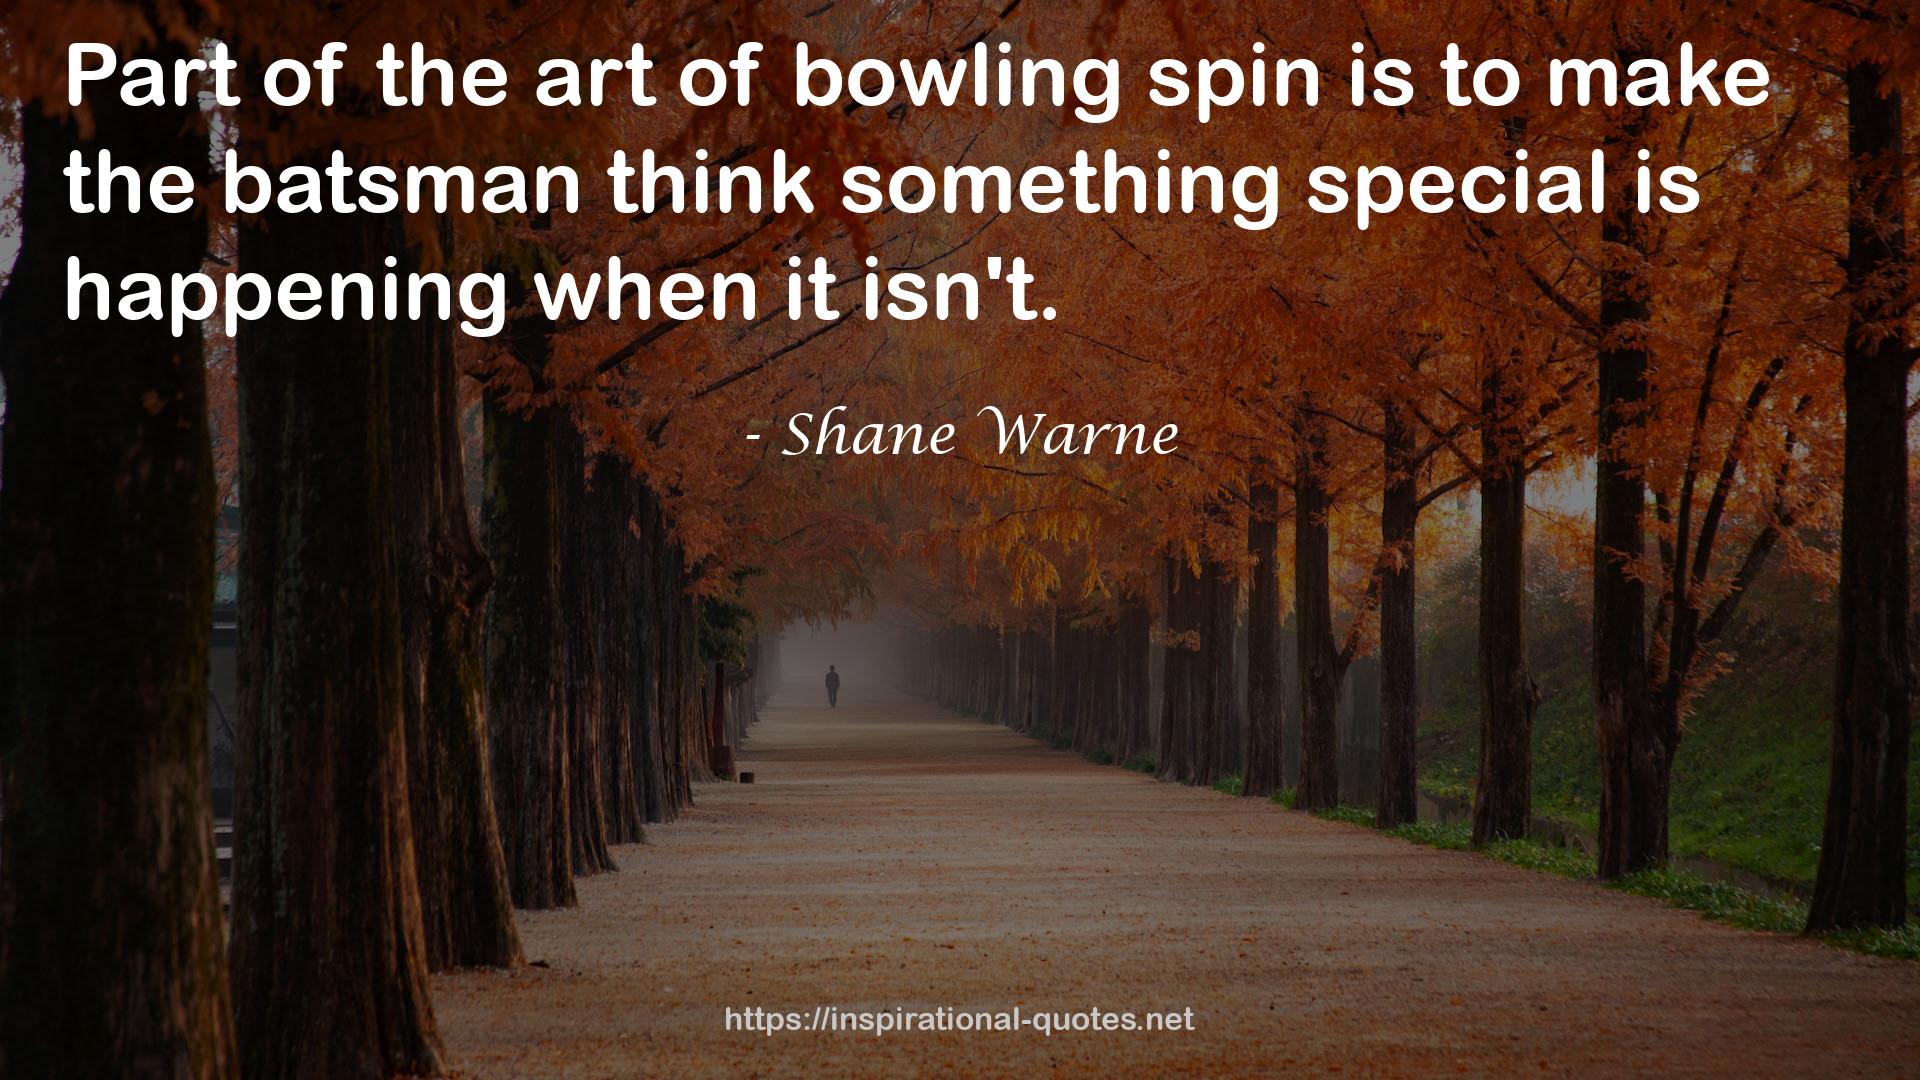 Shane Warne QUOTES